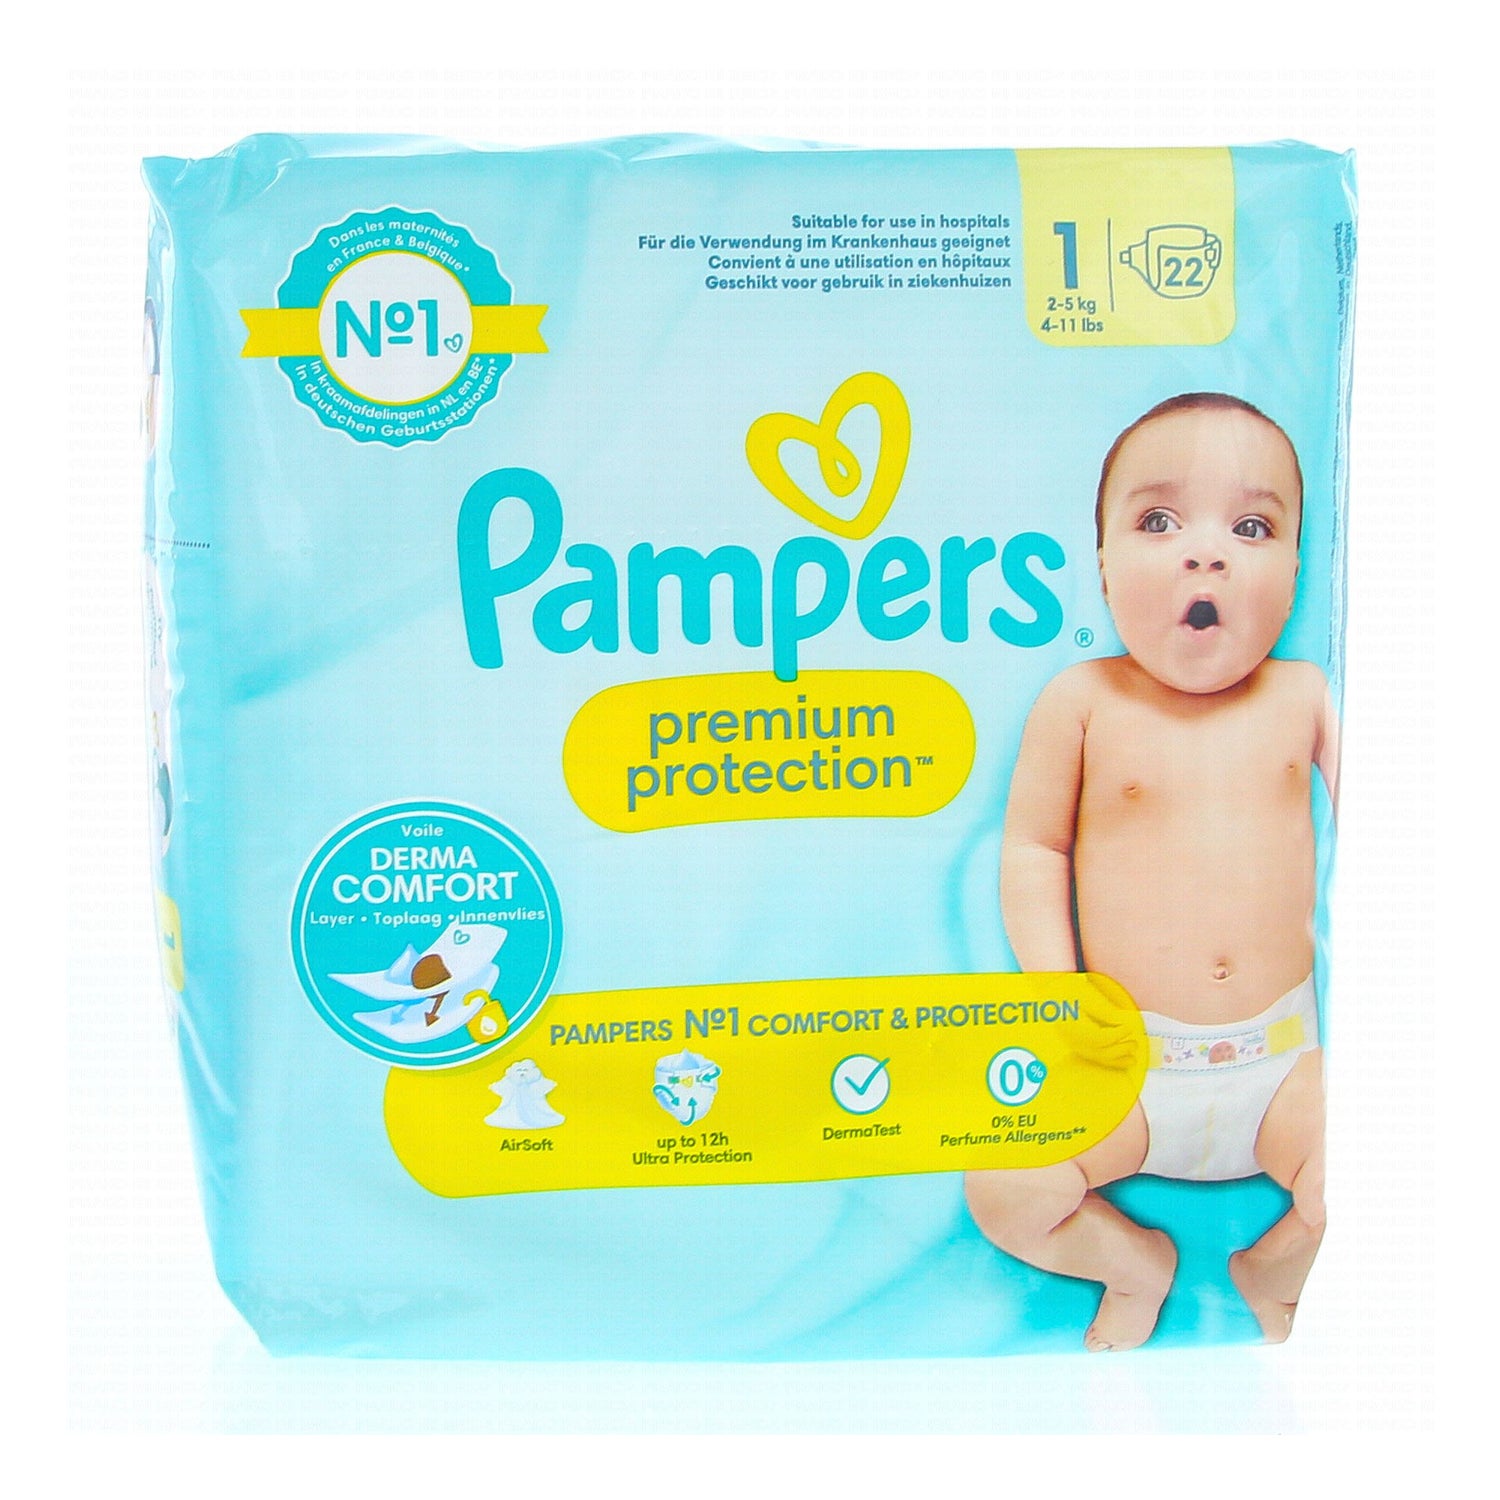 Couche Pampers Premium Protection Taille 2 Pack 31 4 à 8 Kg